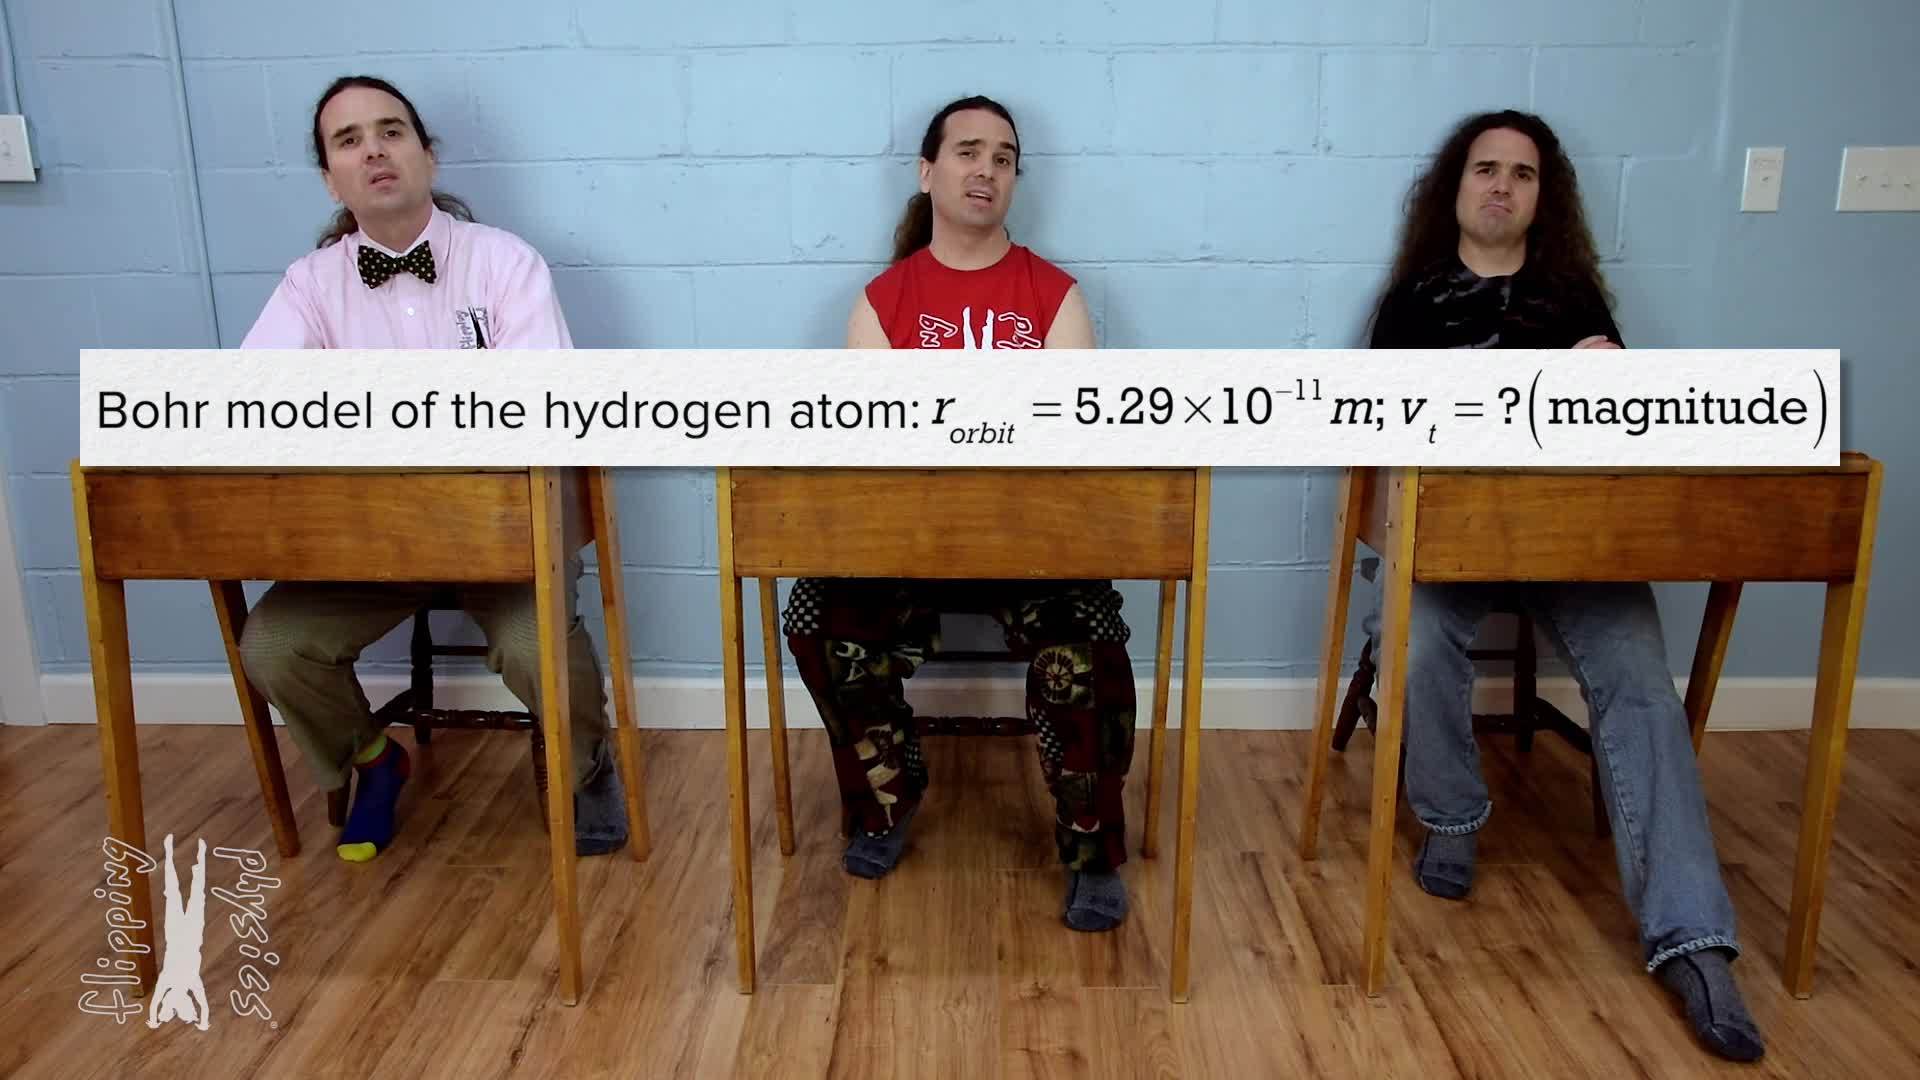 Determining the Speed of the Electron in the Bohr Model of the Hydrogen Atom